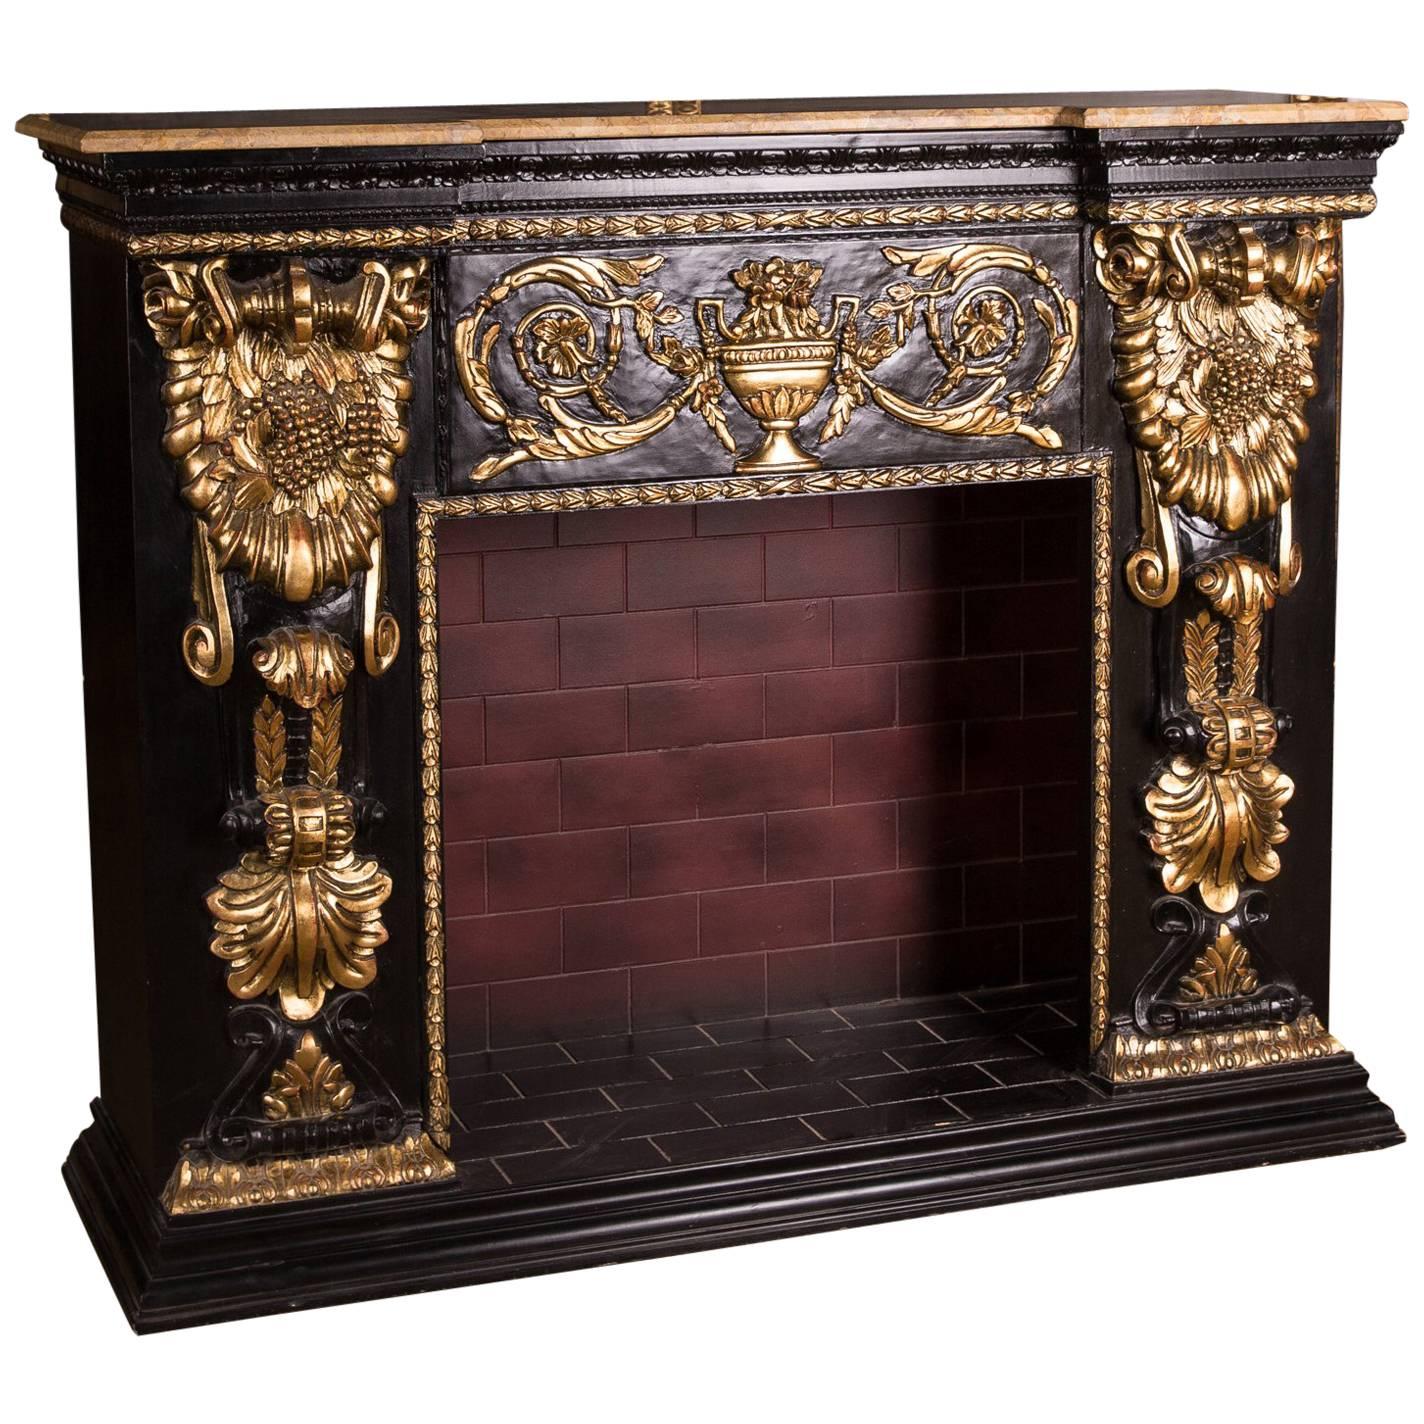 High Quality Fireplace in Baroque Style with Fully Carved Marble Plate